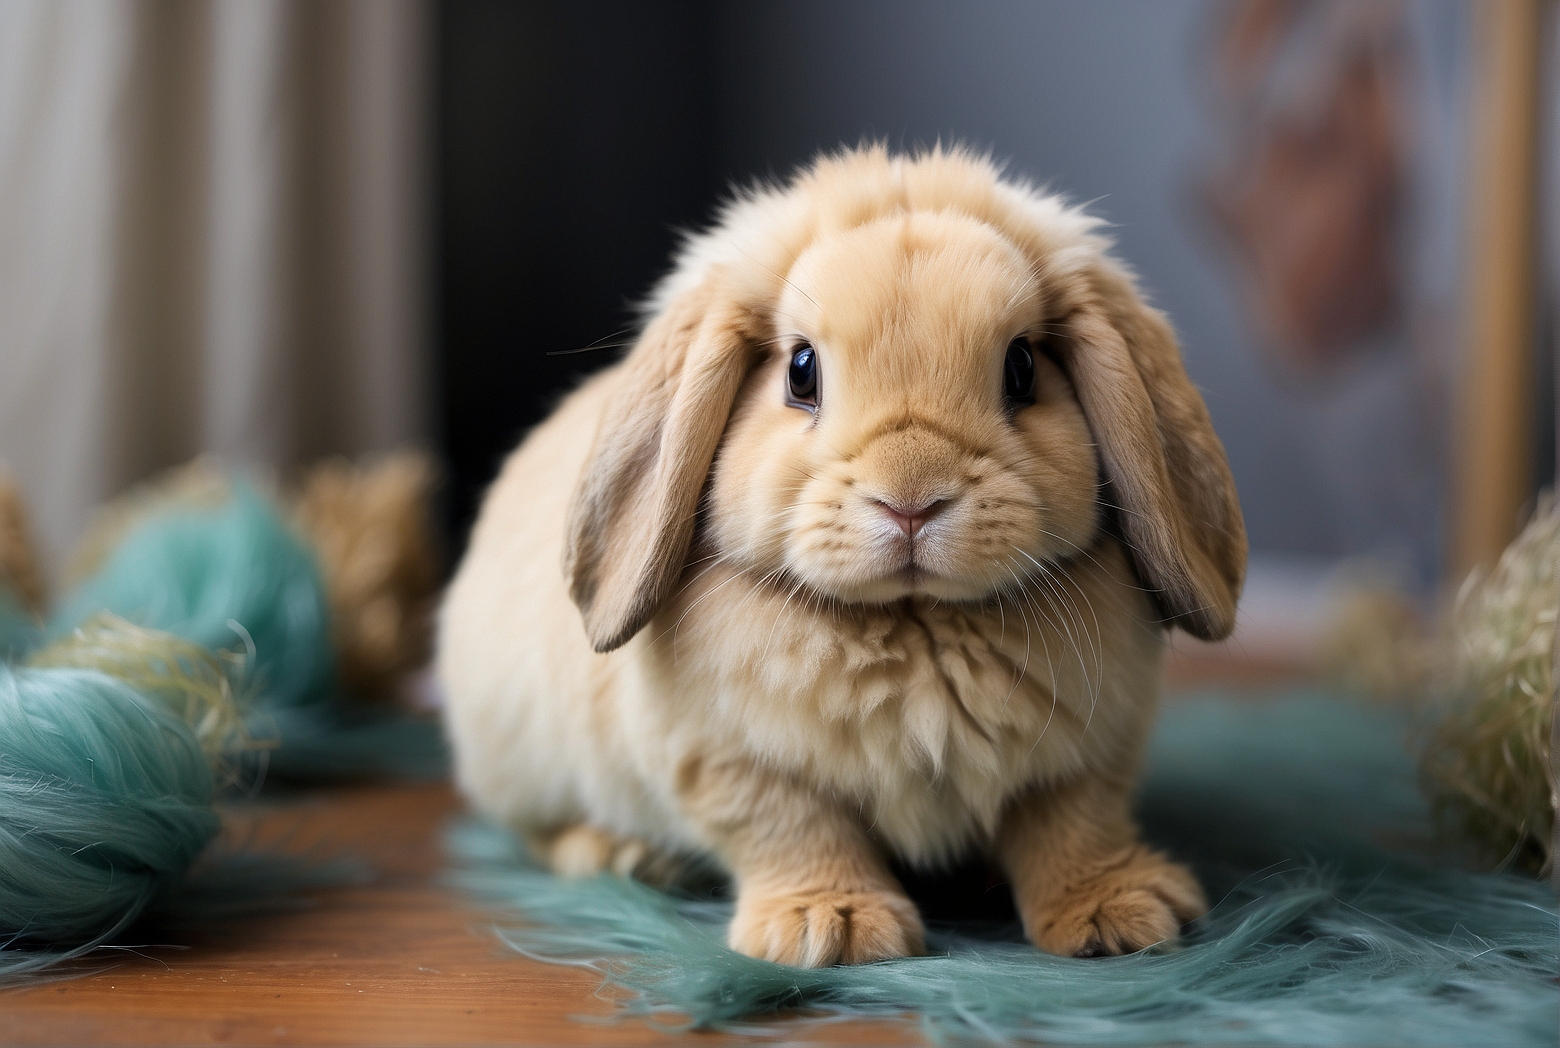 Do Holland Lop Bunnies Shed?